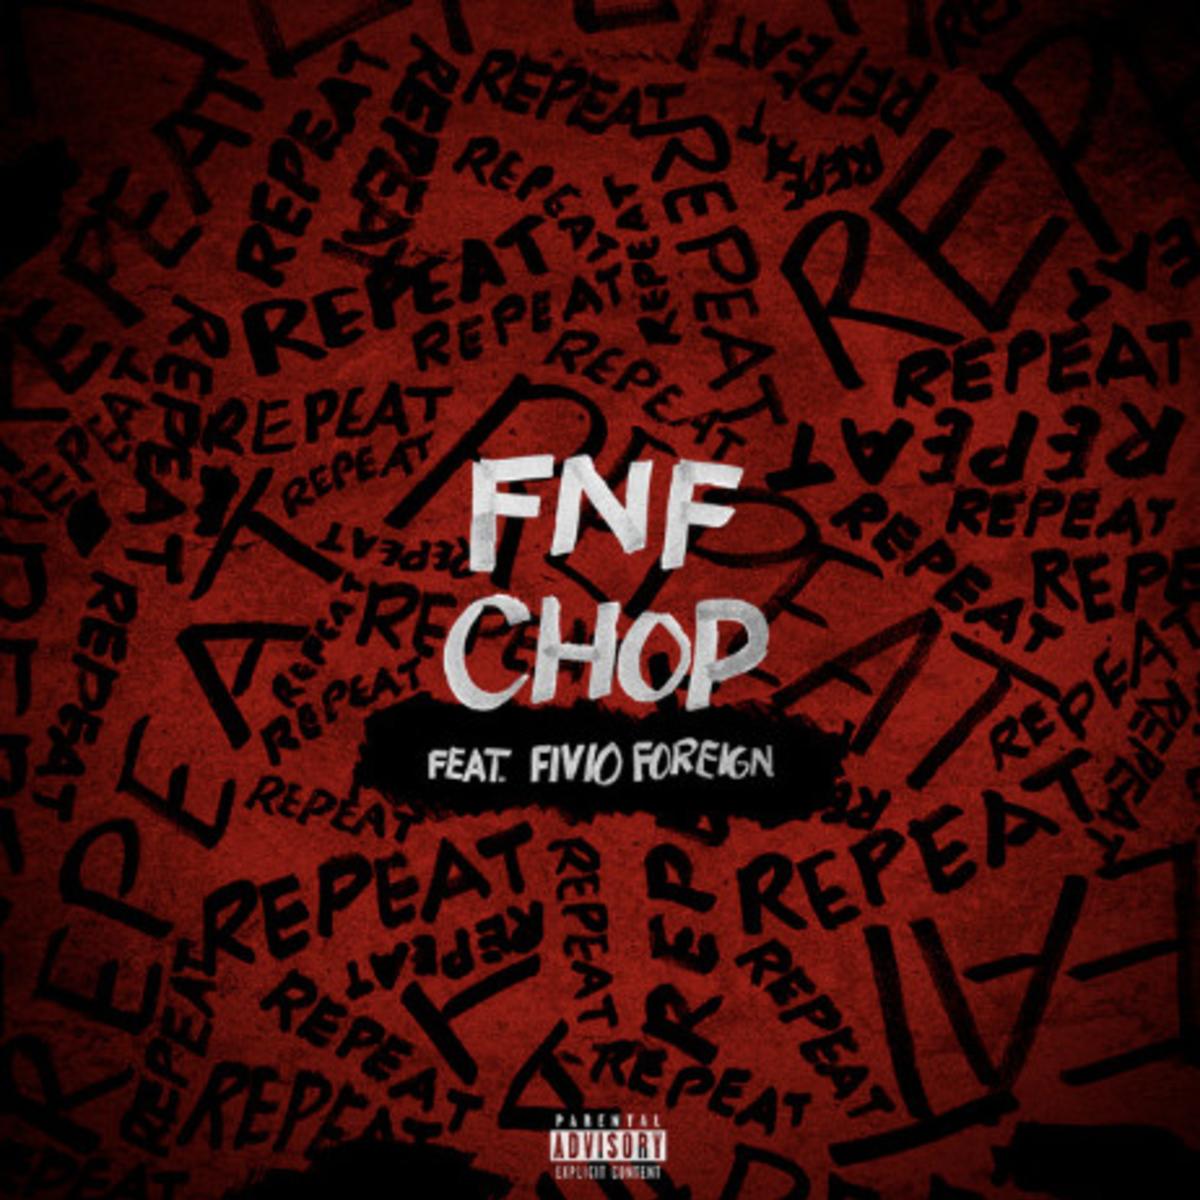 FNF Chop ft. Fivio Foreign Repeat